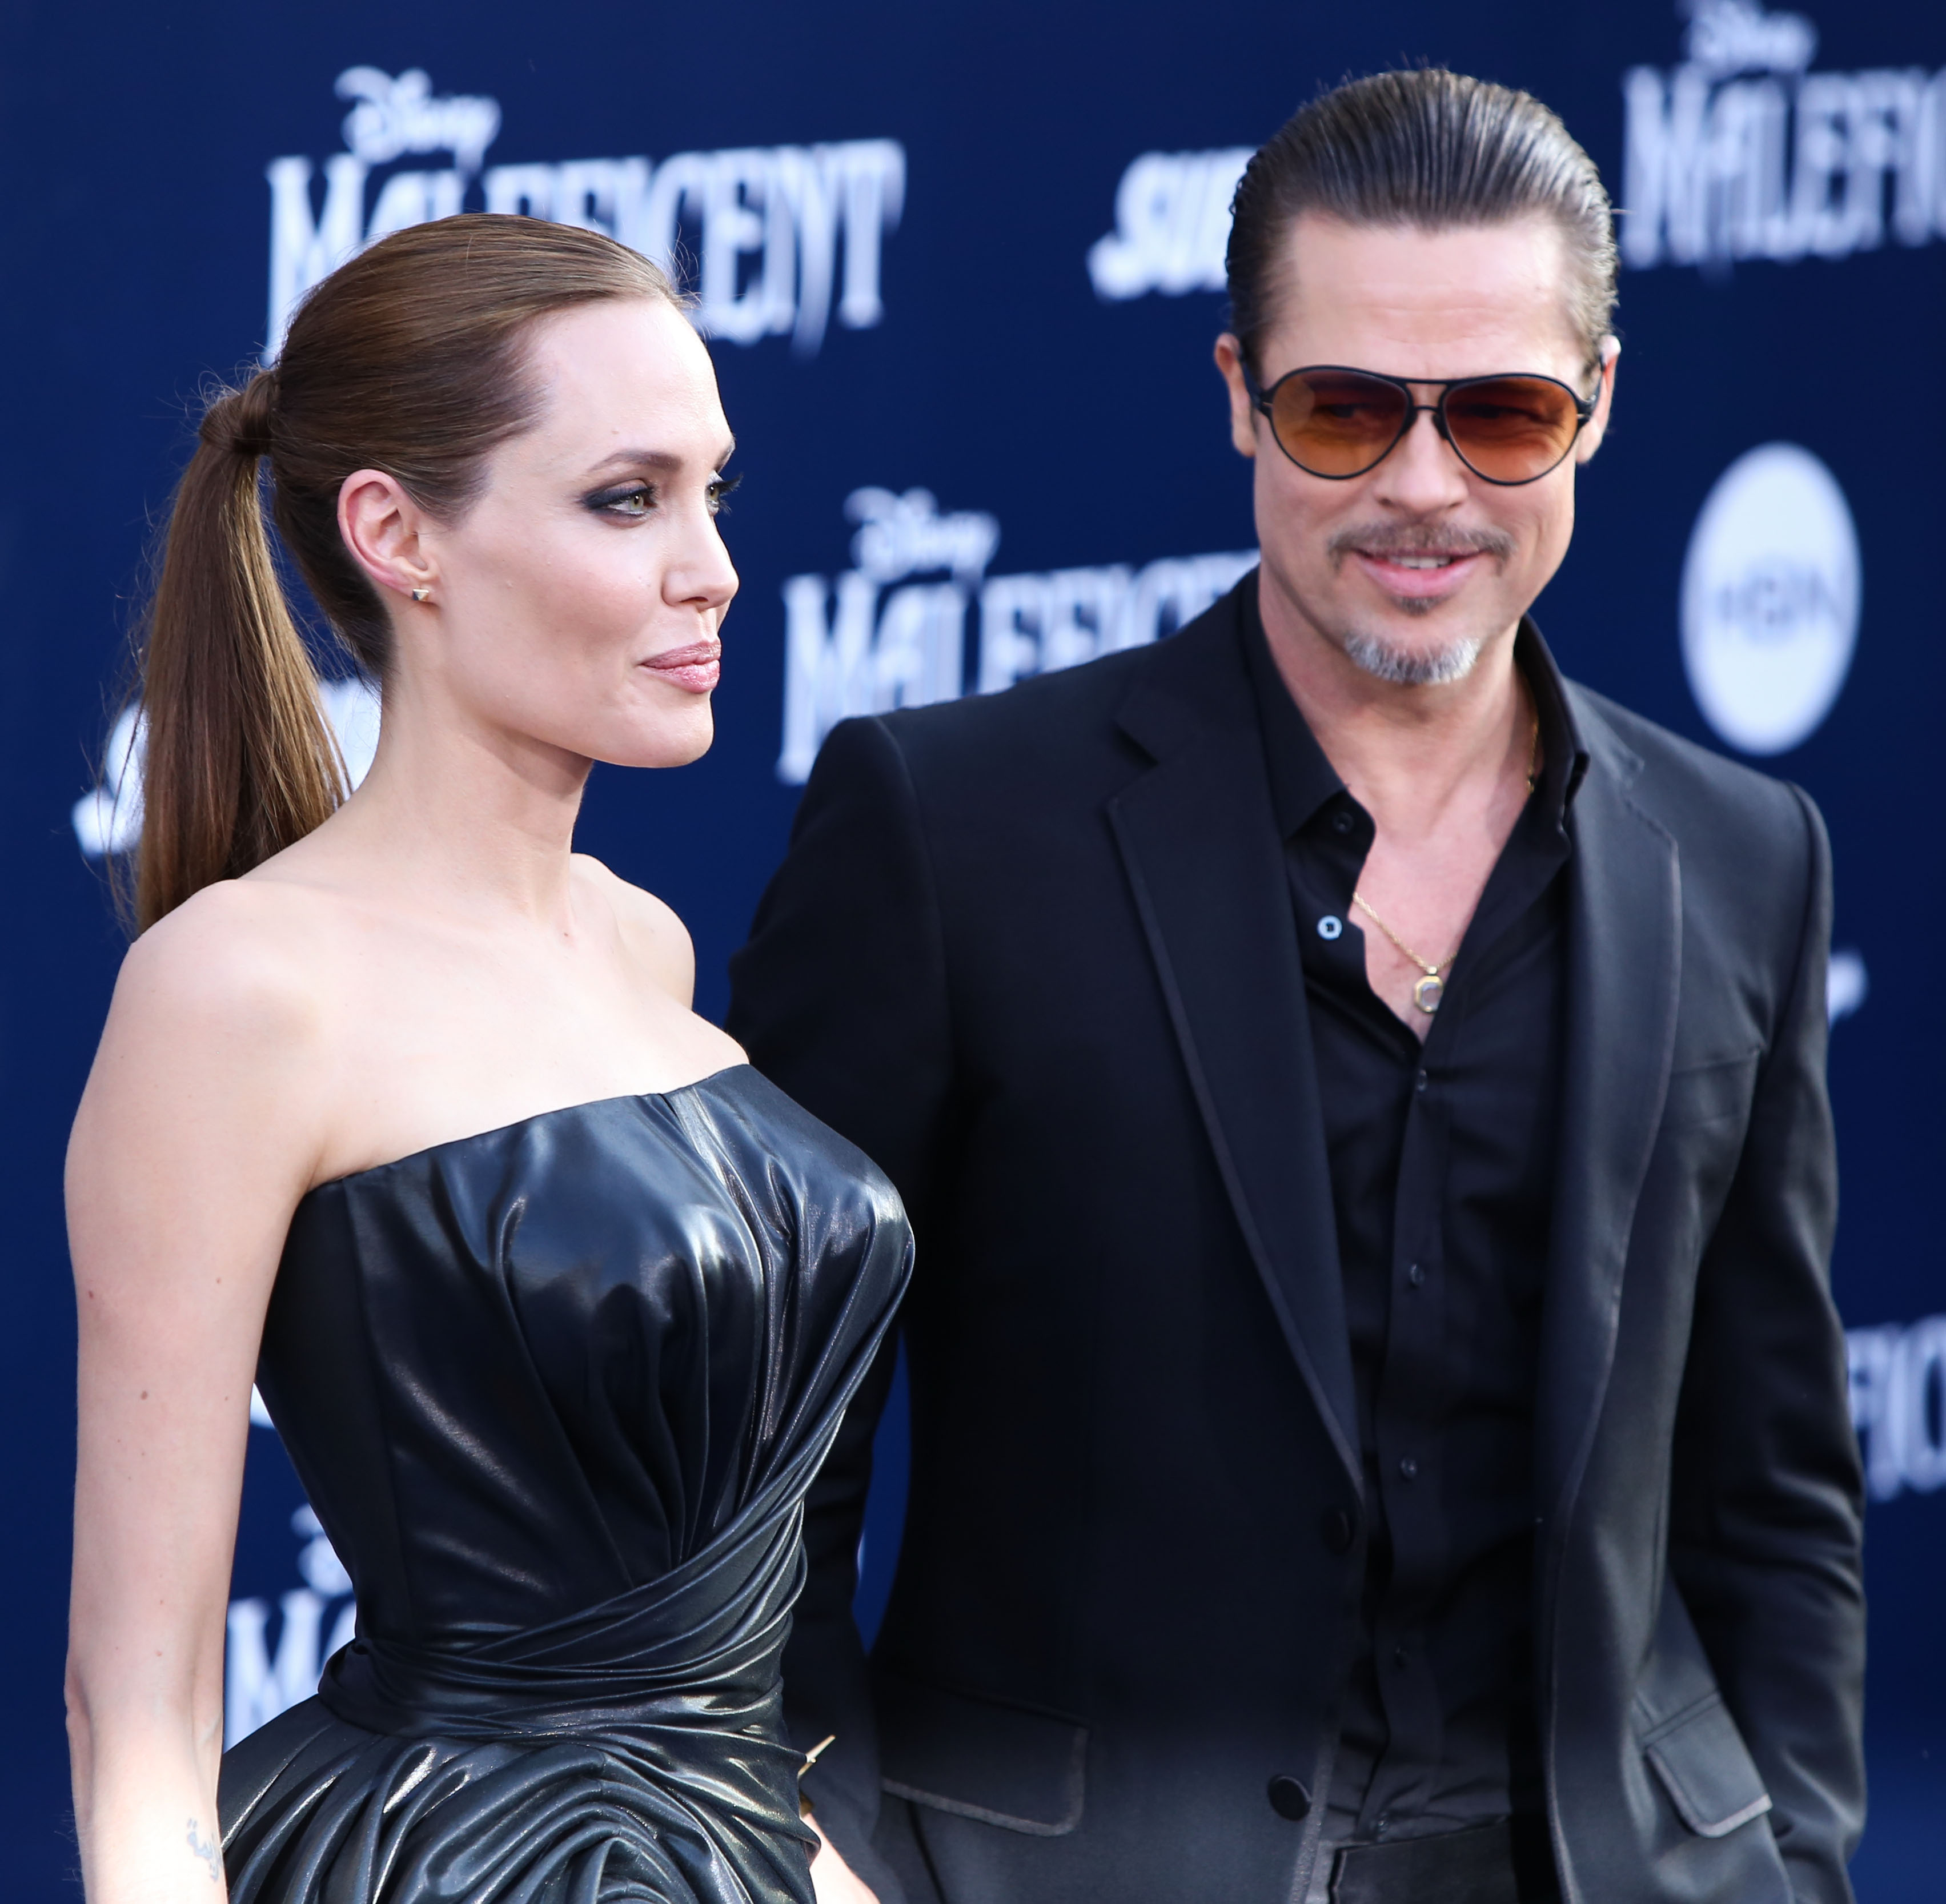 Actress Angelina Jolie and Actor Brad Pitt arrive at the World Premiere Of Disney's 'Maleficent' held at the El Capitan Theatre on May 28, 2014 in Hollywood, Los Angeles. (Xavier Collin—Celebrity Monitor/Corbis)